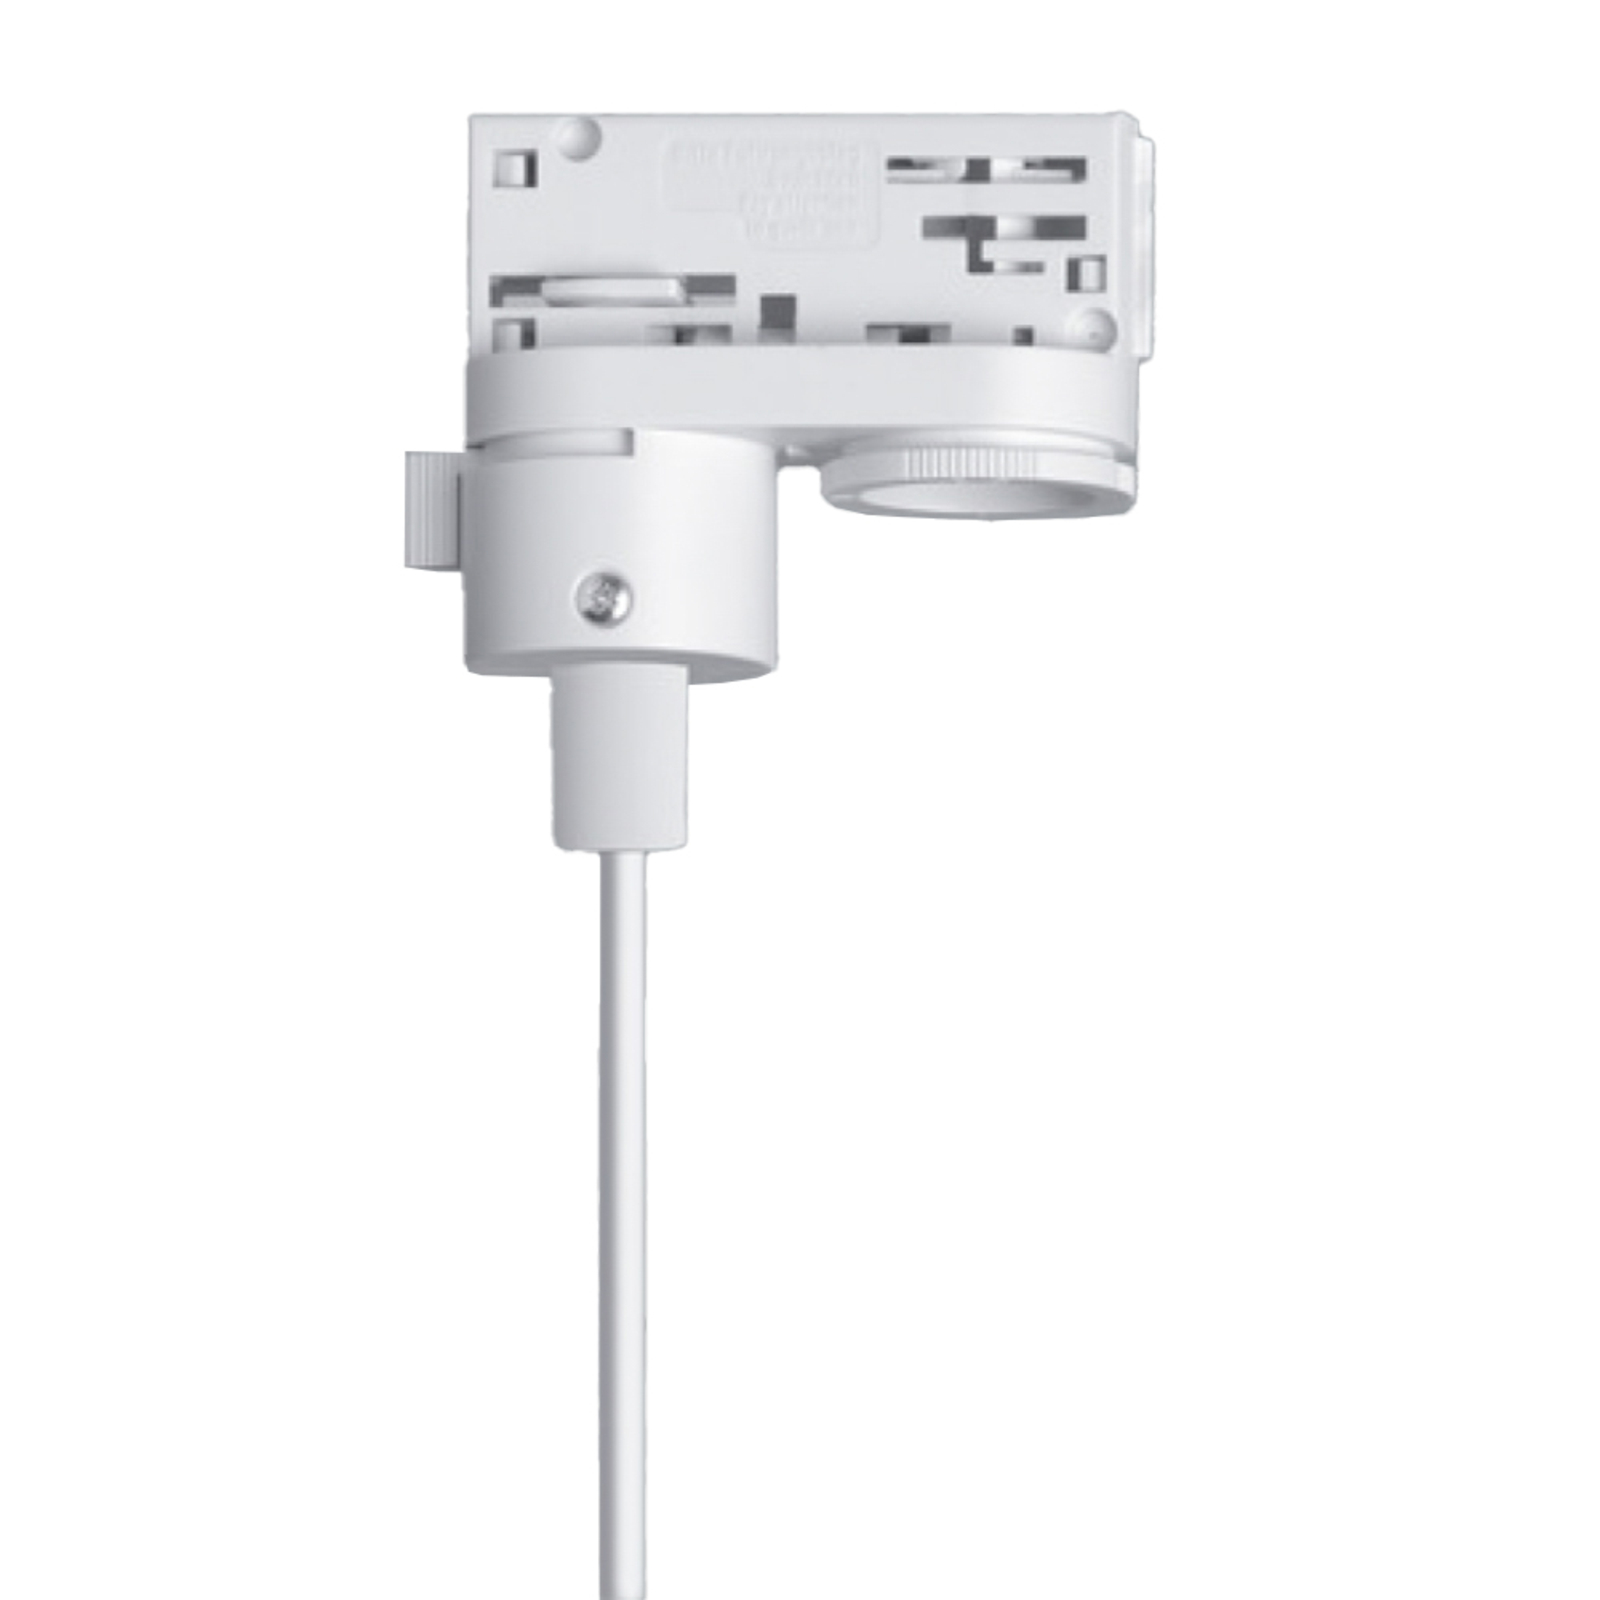 ERCO 3-circuit adapter for pendant lights, white